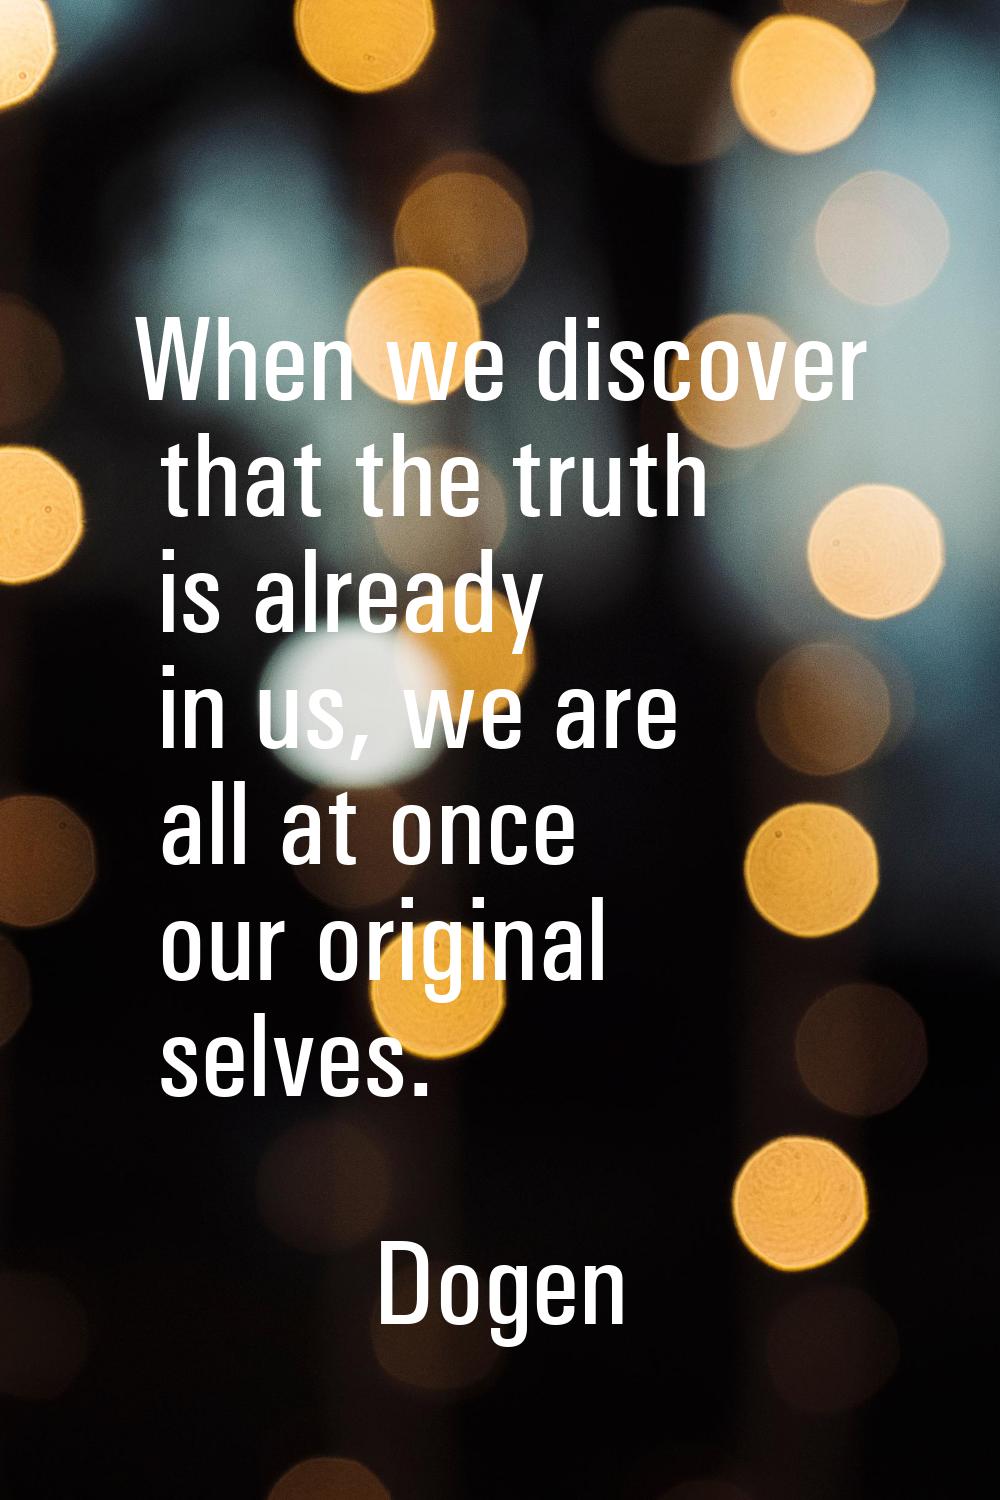 When we discover that the truth is already in us, we are all at once our original selves.